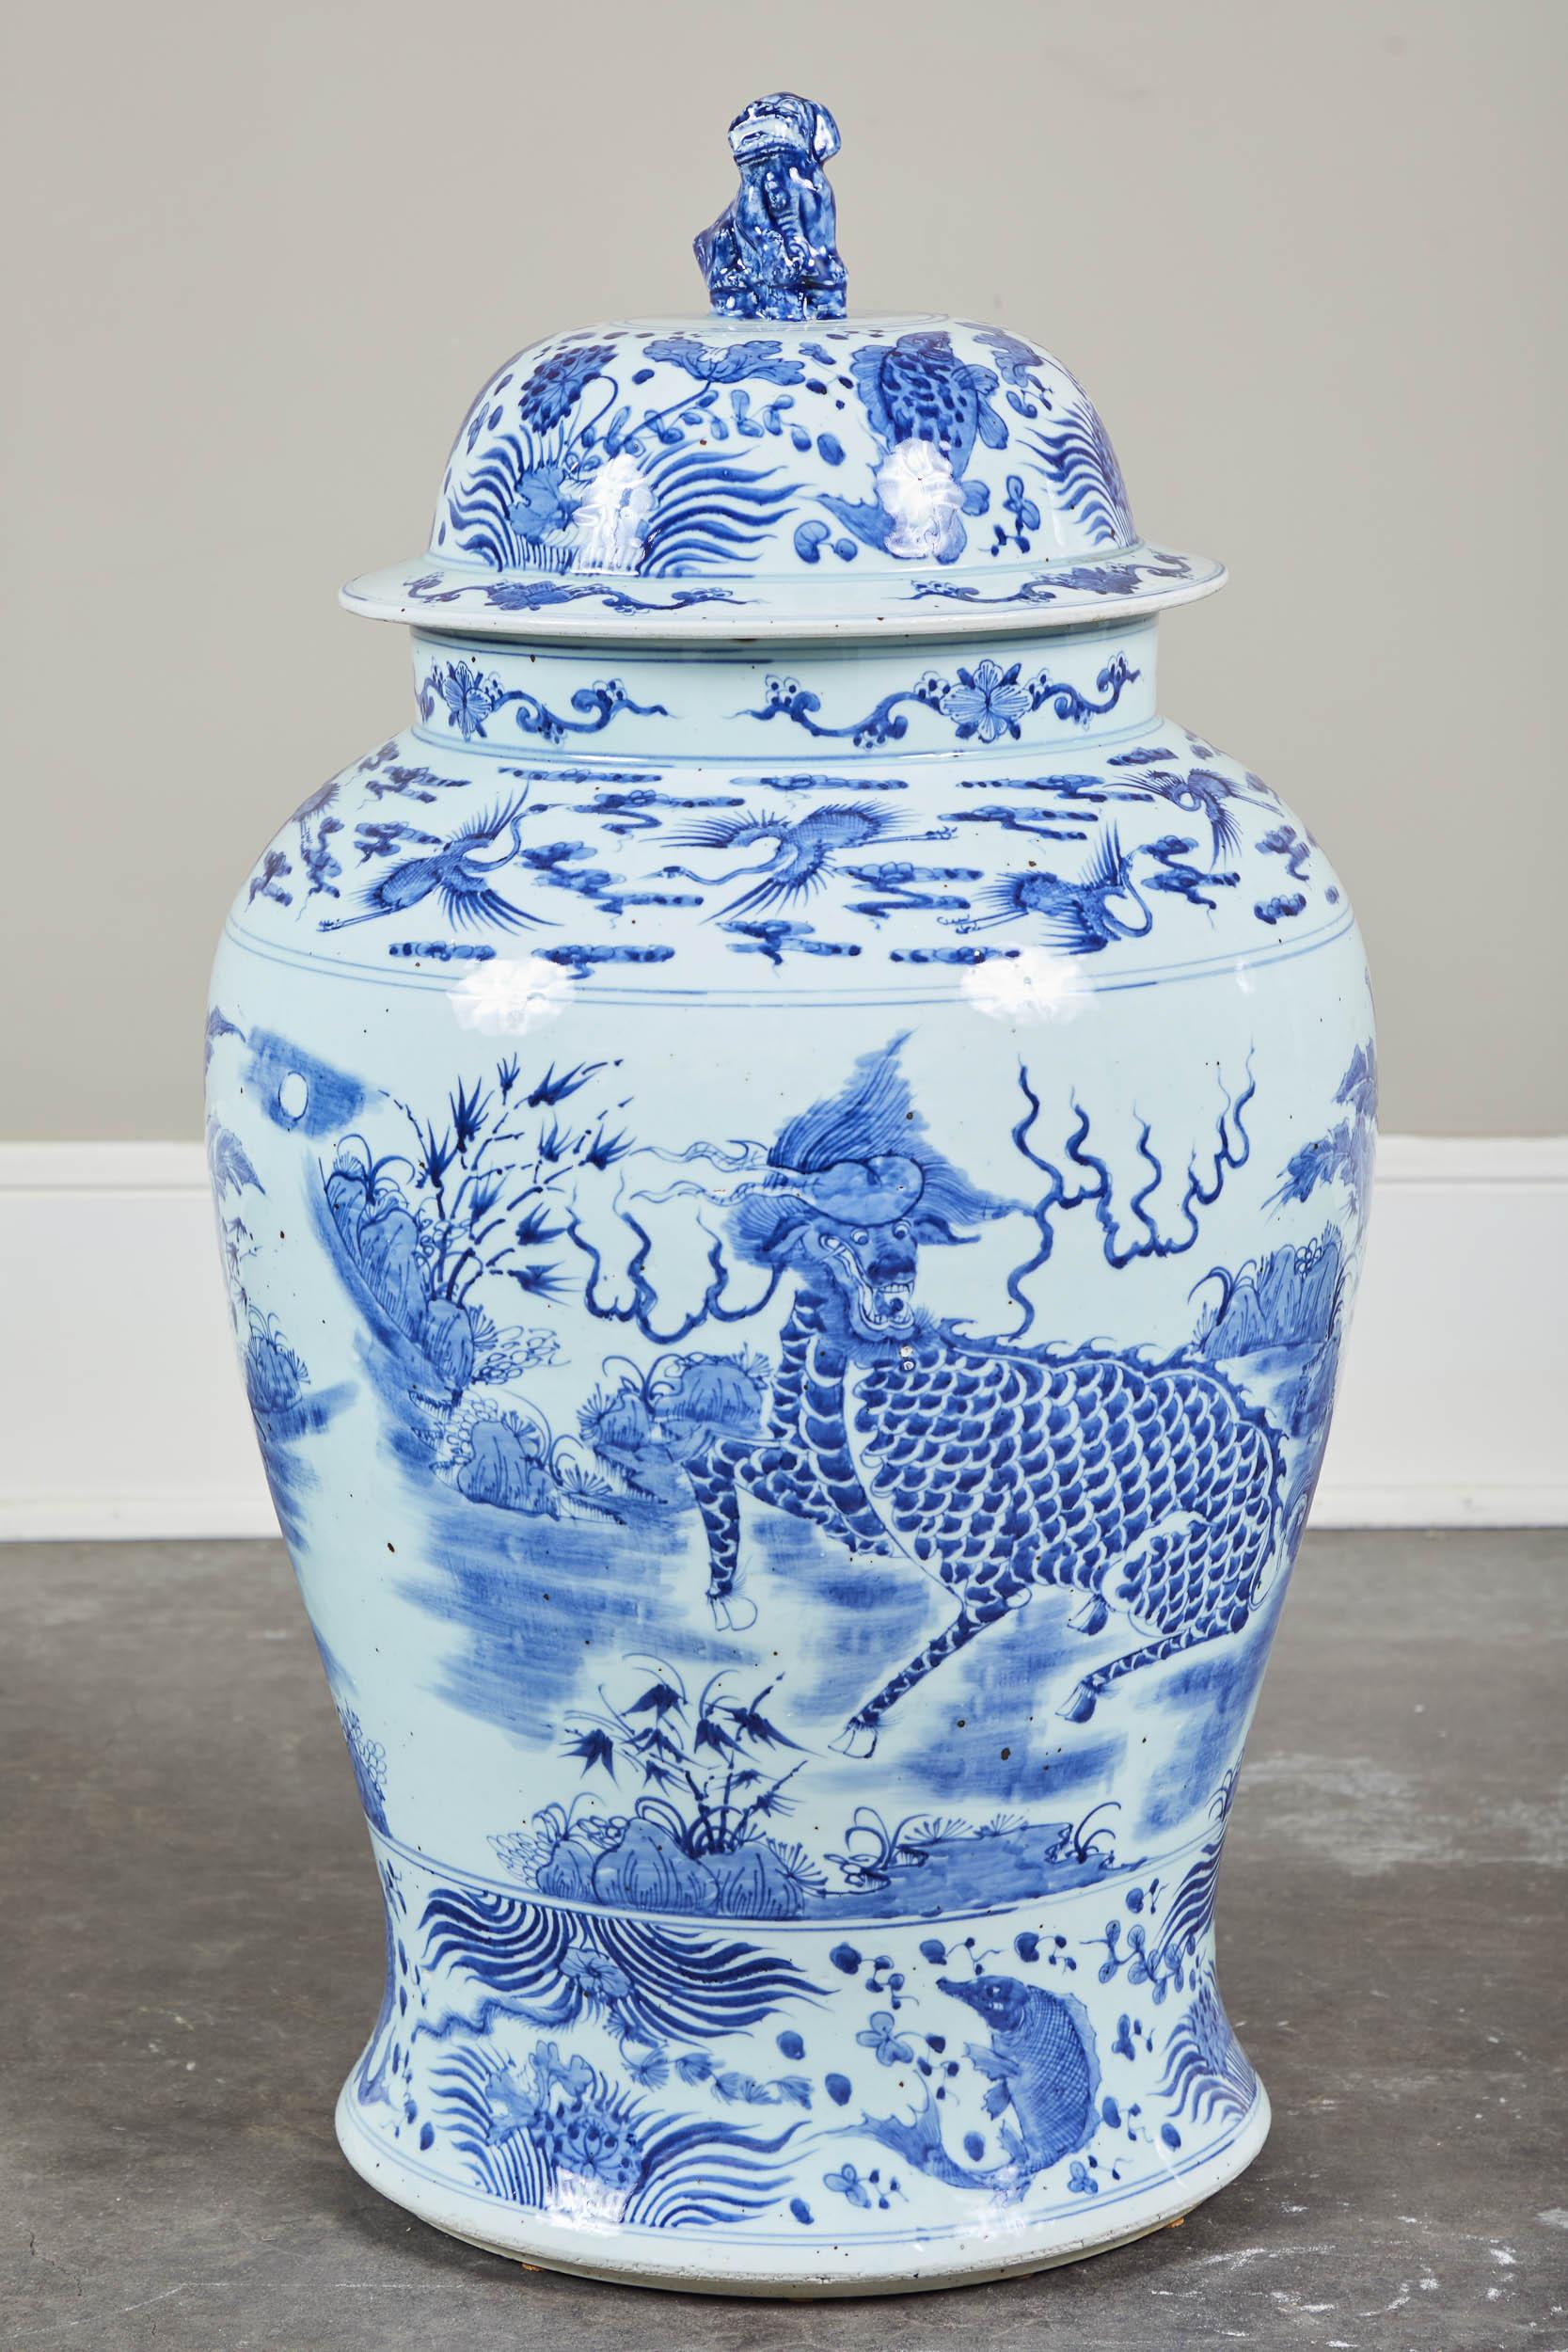 A pair of 20th century large blue and white Chinese ginger jars with lids. Foo dog handles top this pair of landscape and foliage detailed vases.